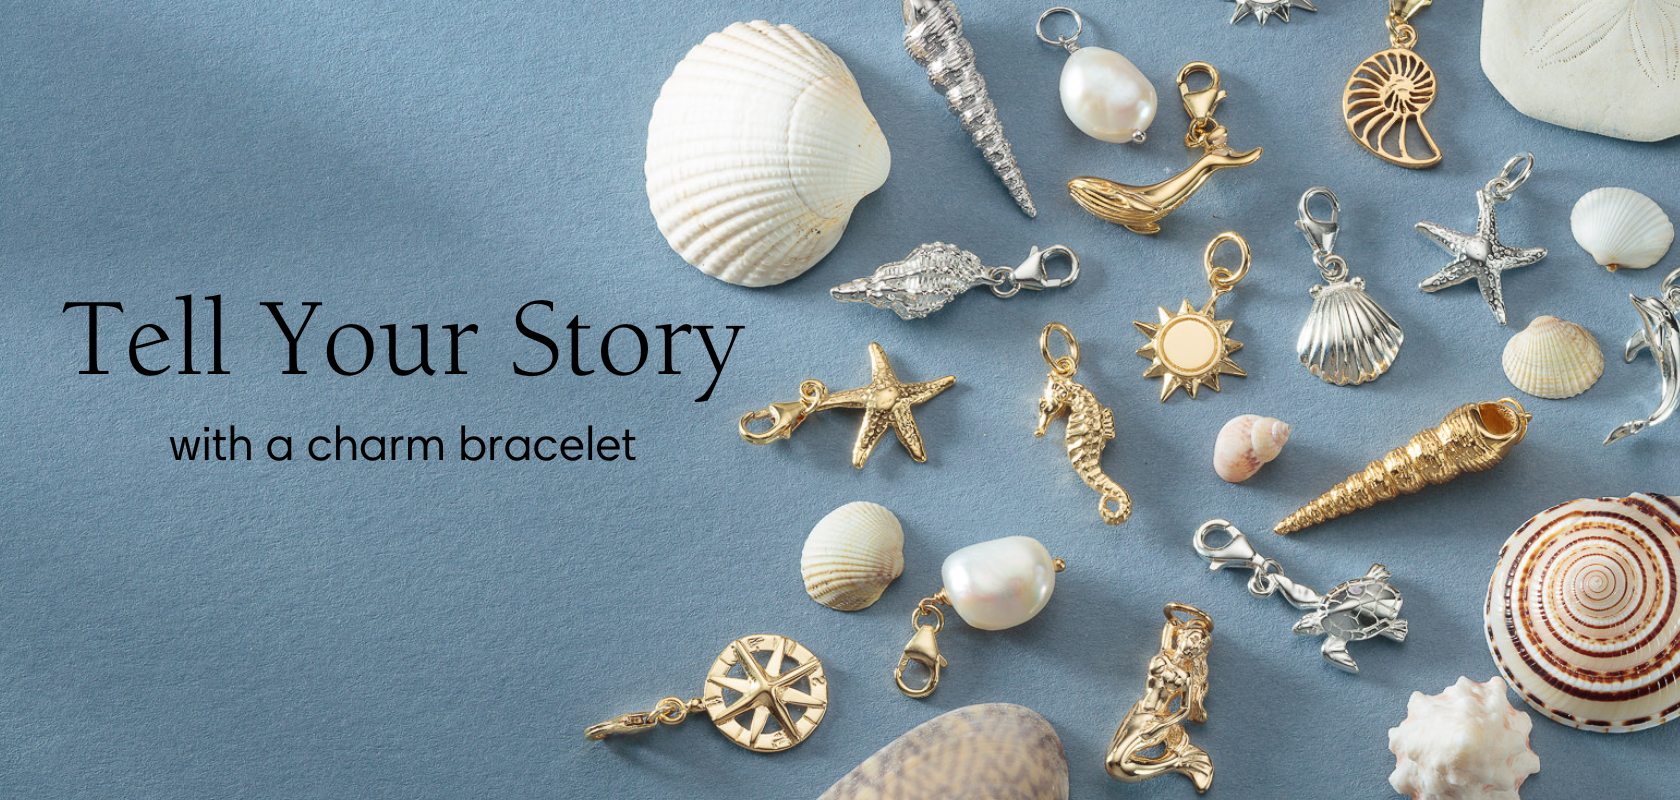 Tell Your Story with Charms on a charm bracelet | Lily Charmed